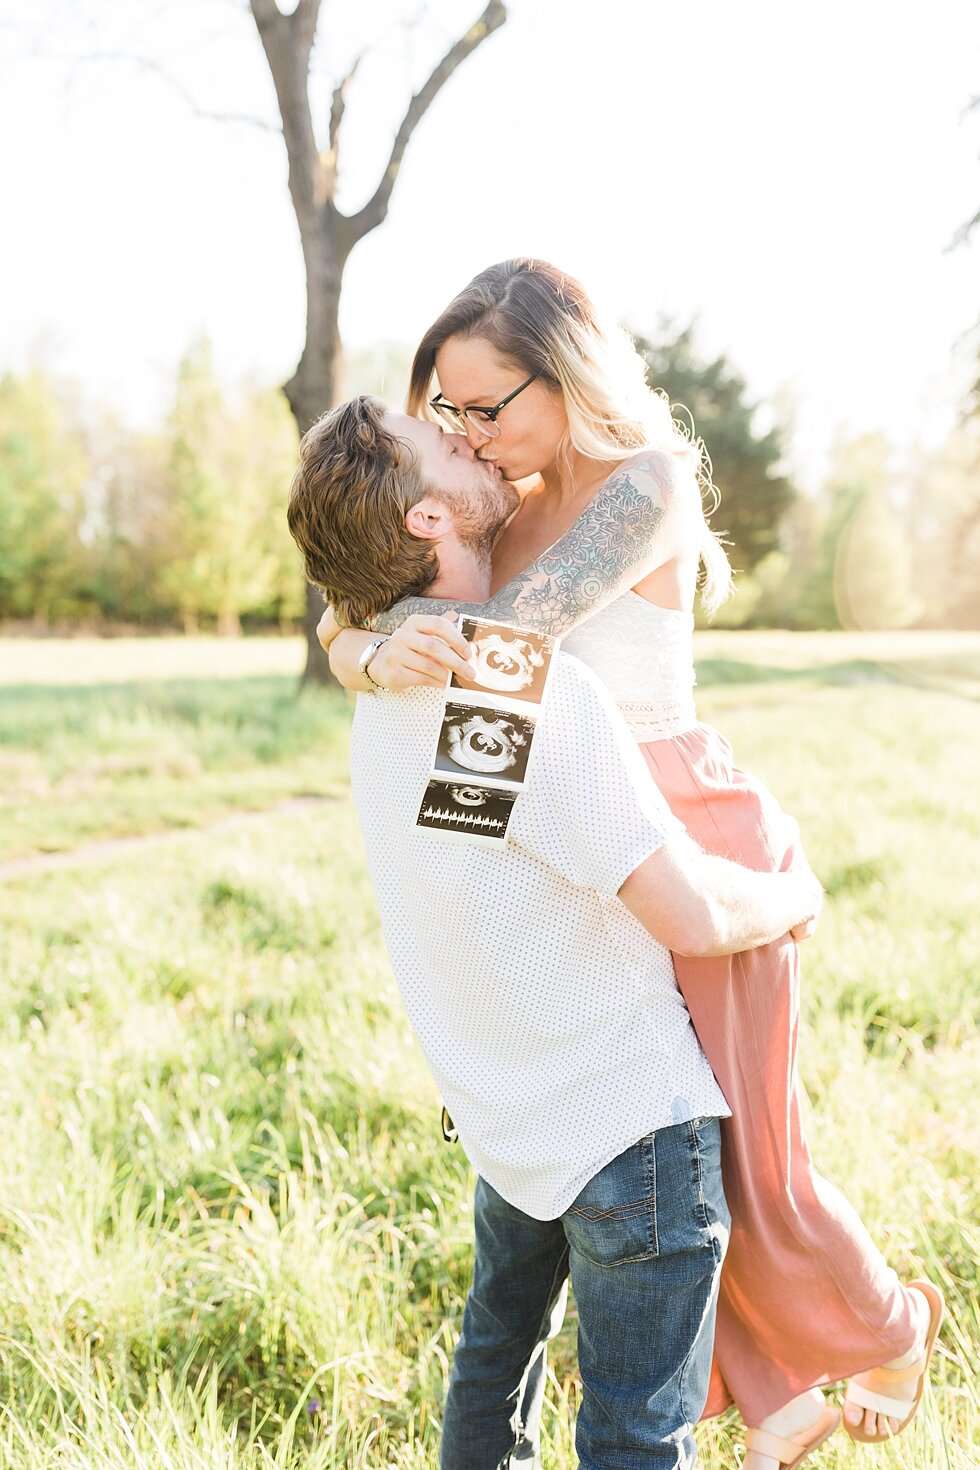  Ultrasound announcement as this couple kisses and celebrates a new baby on the way! announcement for a southern spring session. couple baby on the way expecting excited maternity photography congratulations announcement baby coming soon #padbl #padb